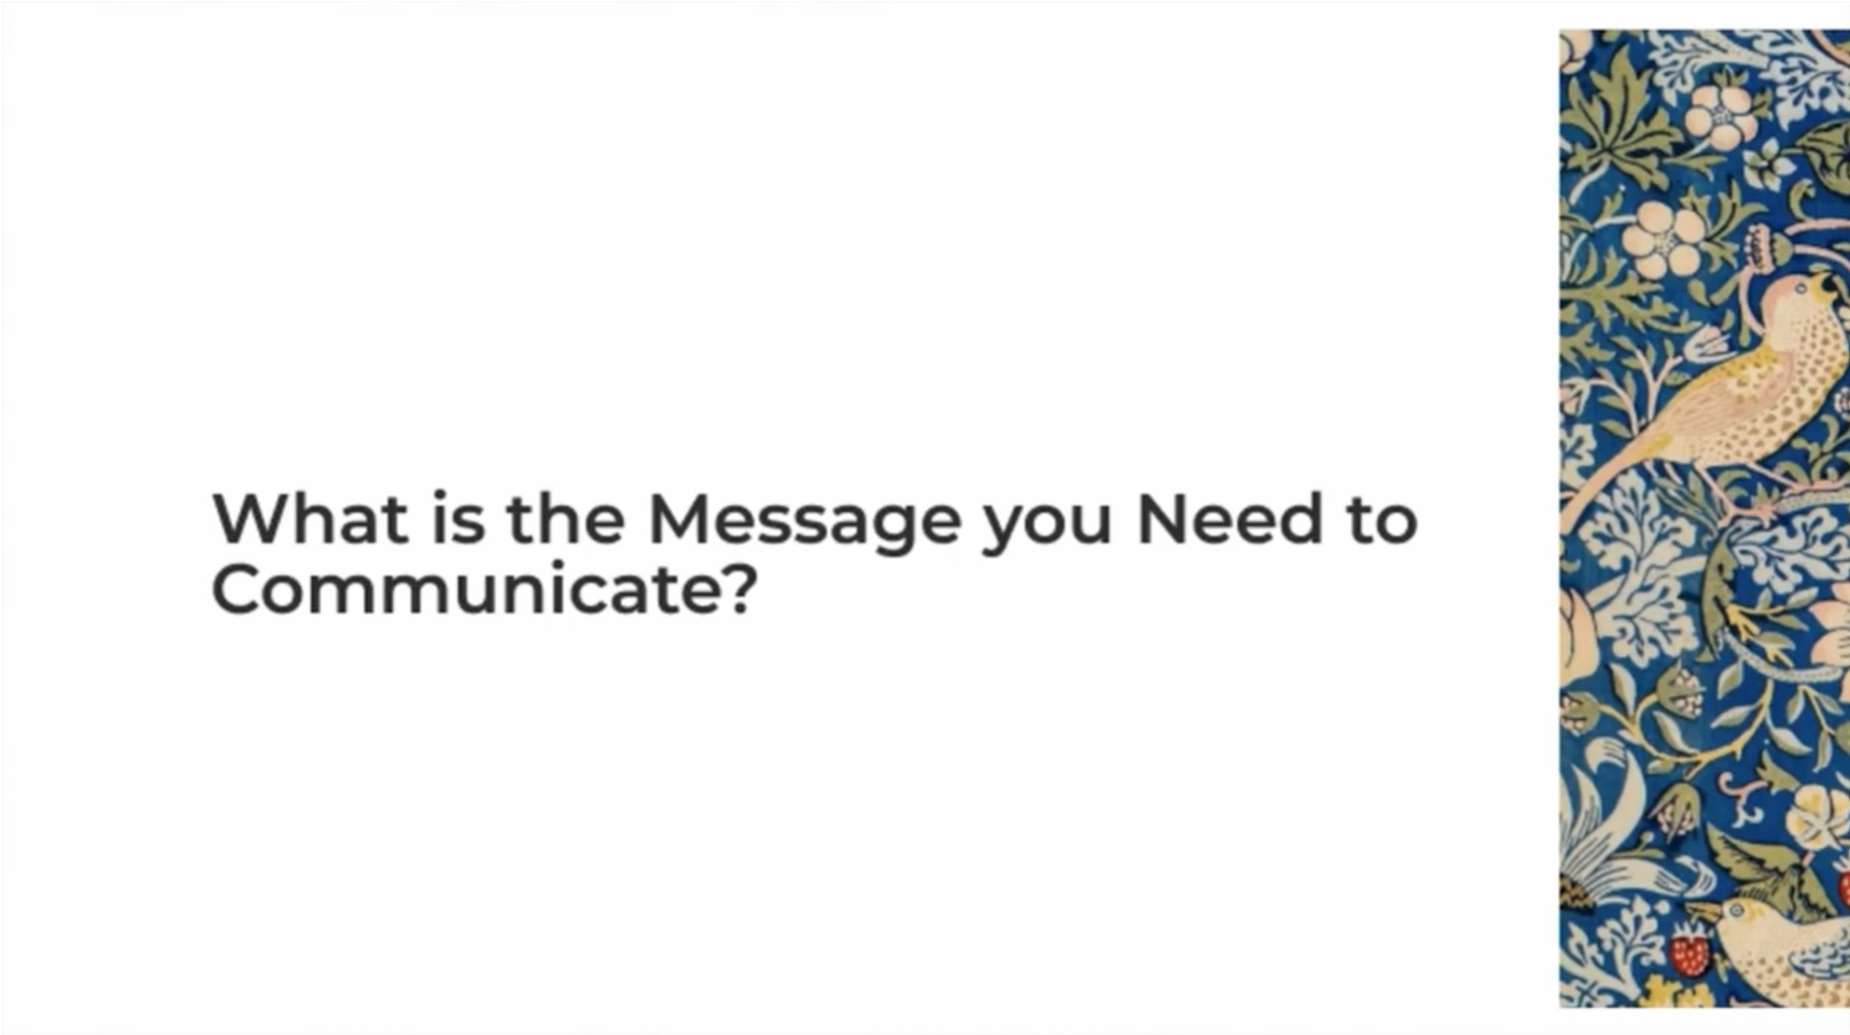 What is the Message you Need to Communicate